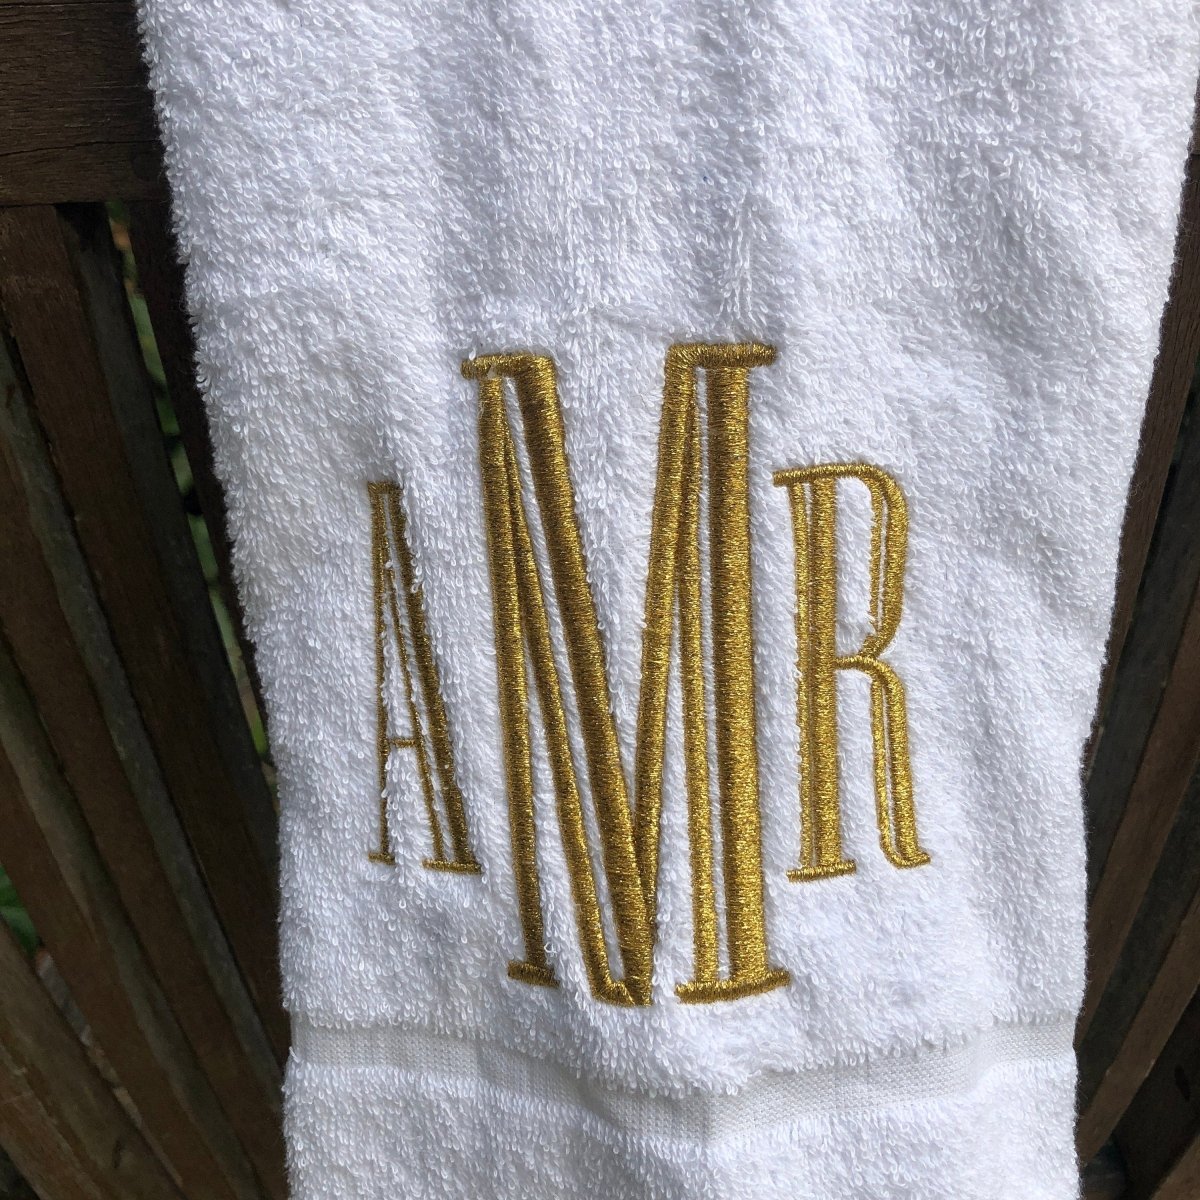 Gold Embroidered Monogram White Bathroom Towel - Linen and Letters